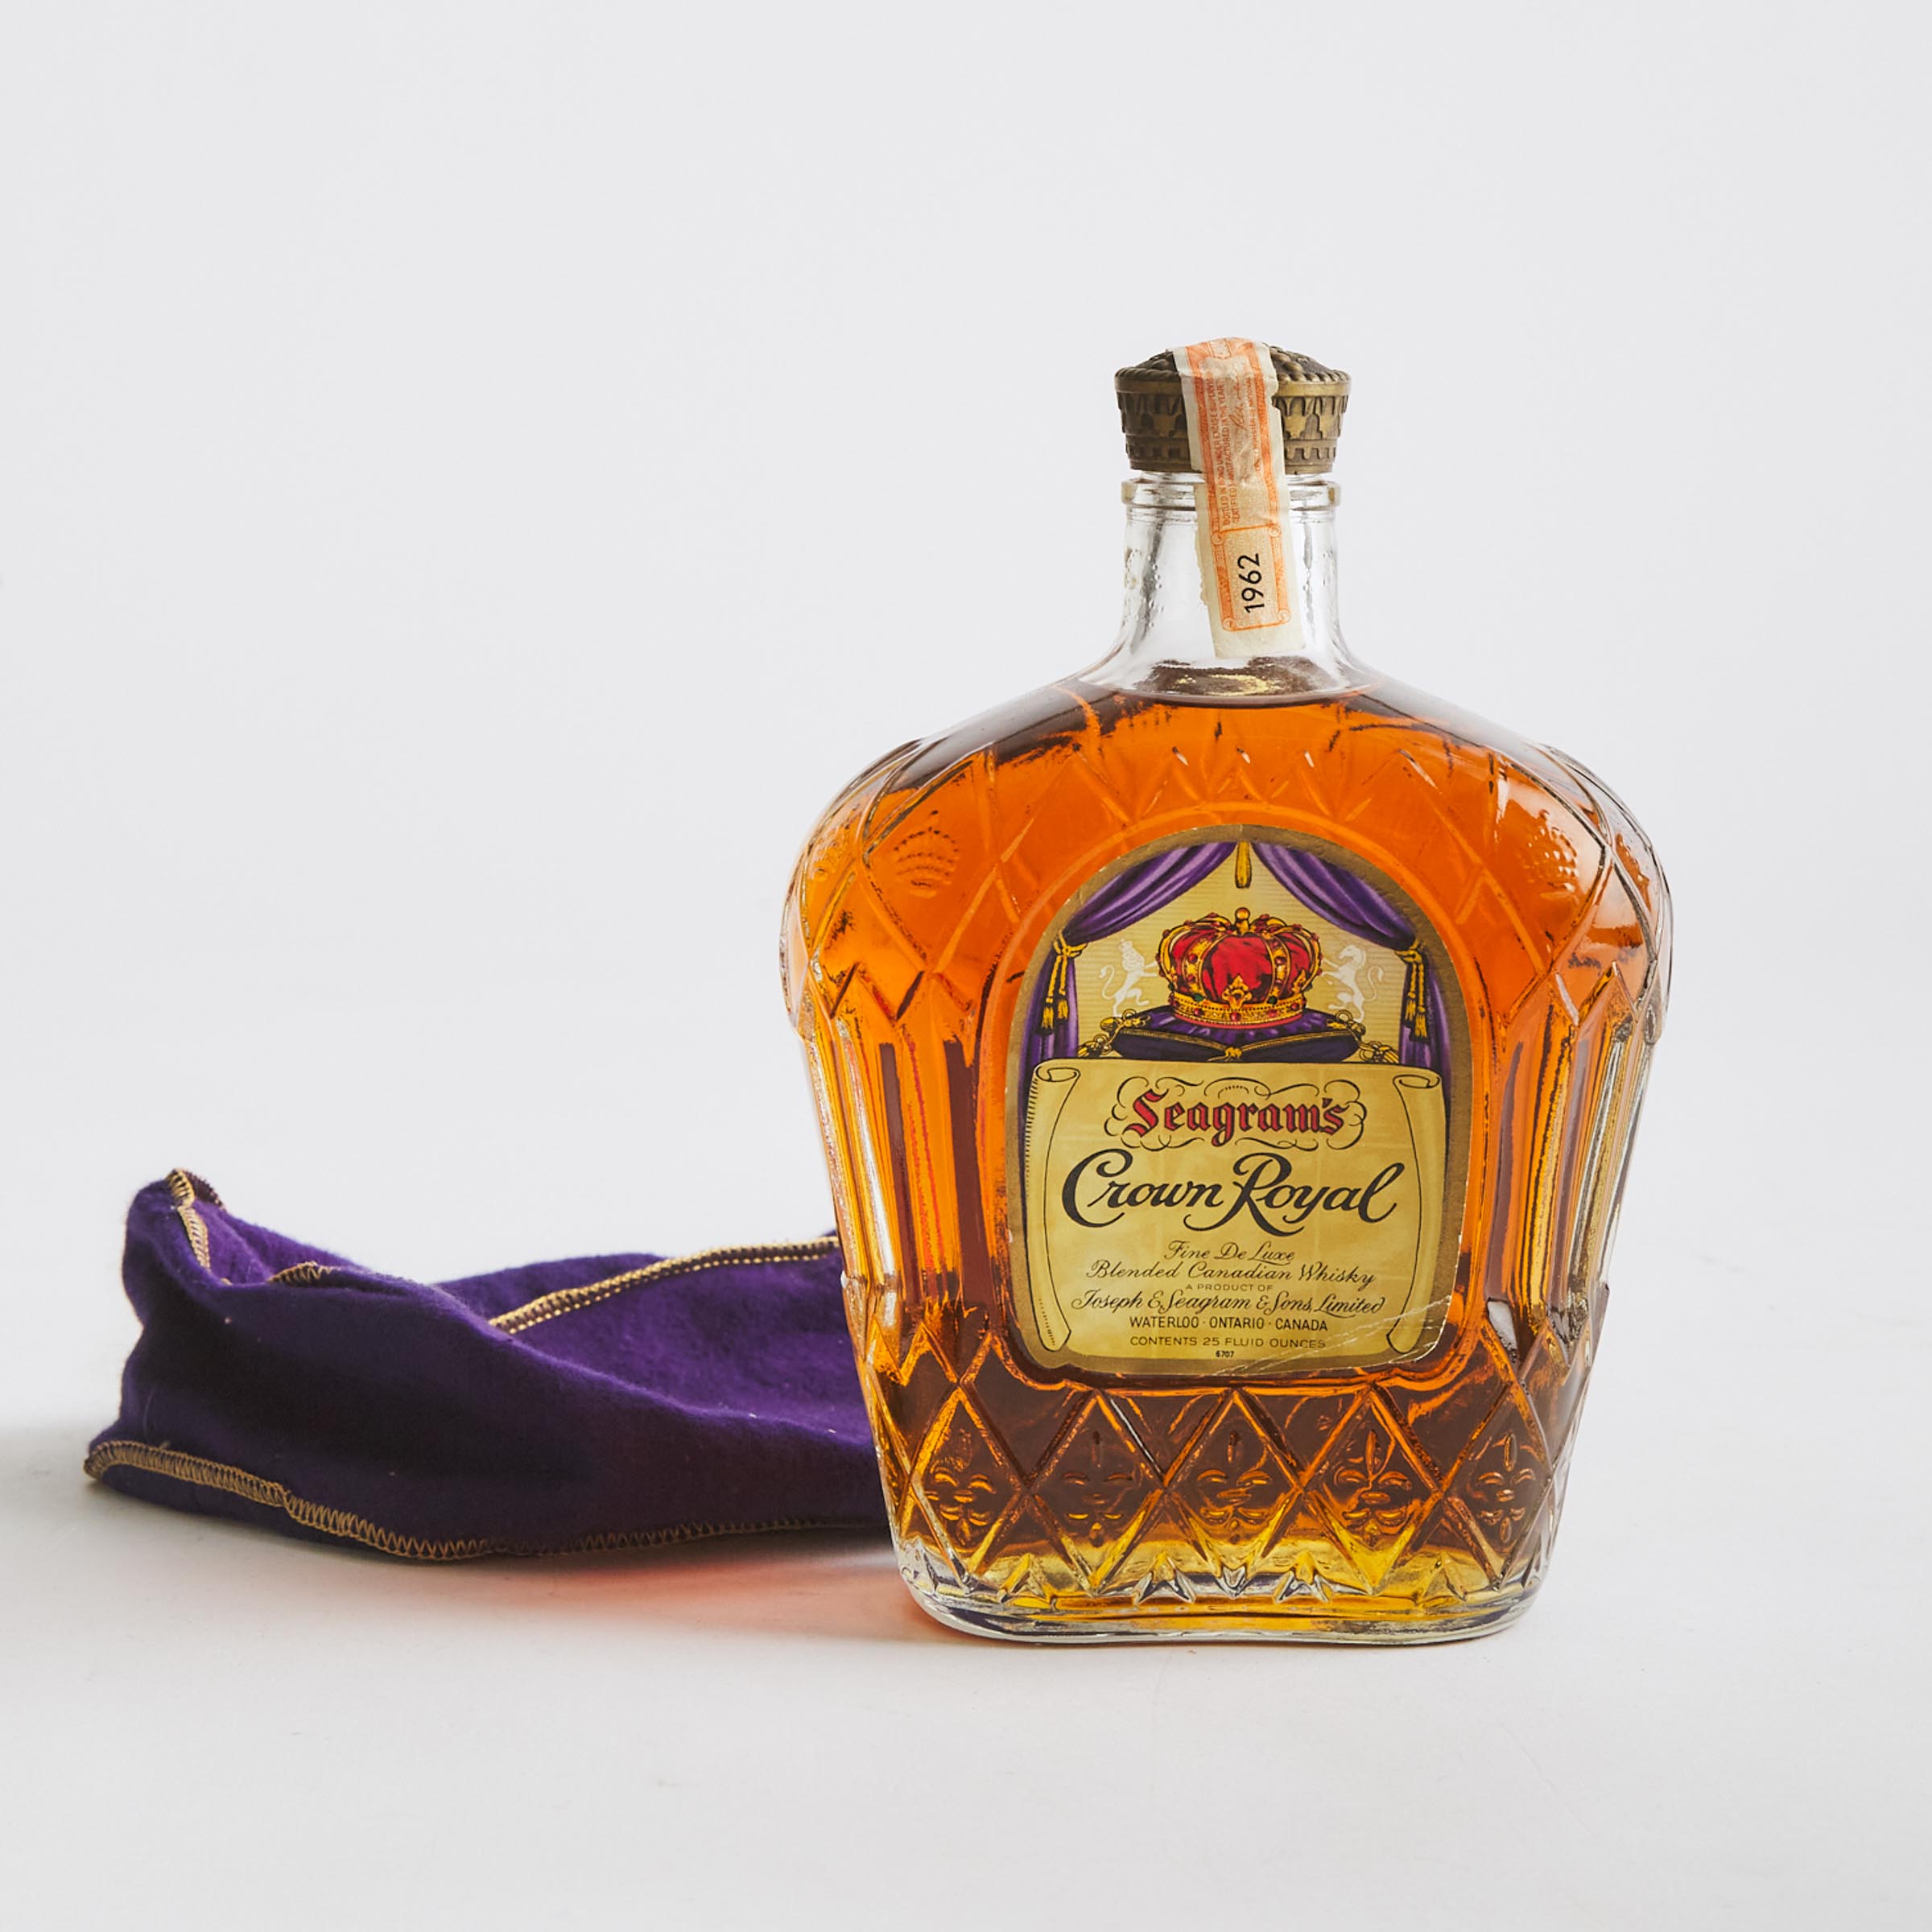 SEAGRAM'S CROWN ROYAL FINE DE LUXE BLENDED CANADIAN WHISKY (ONE 25 OZ.)